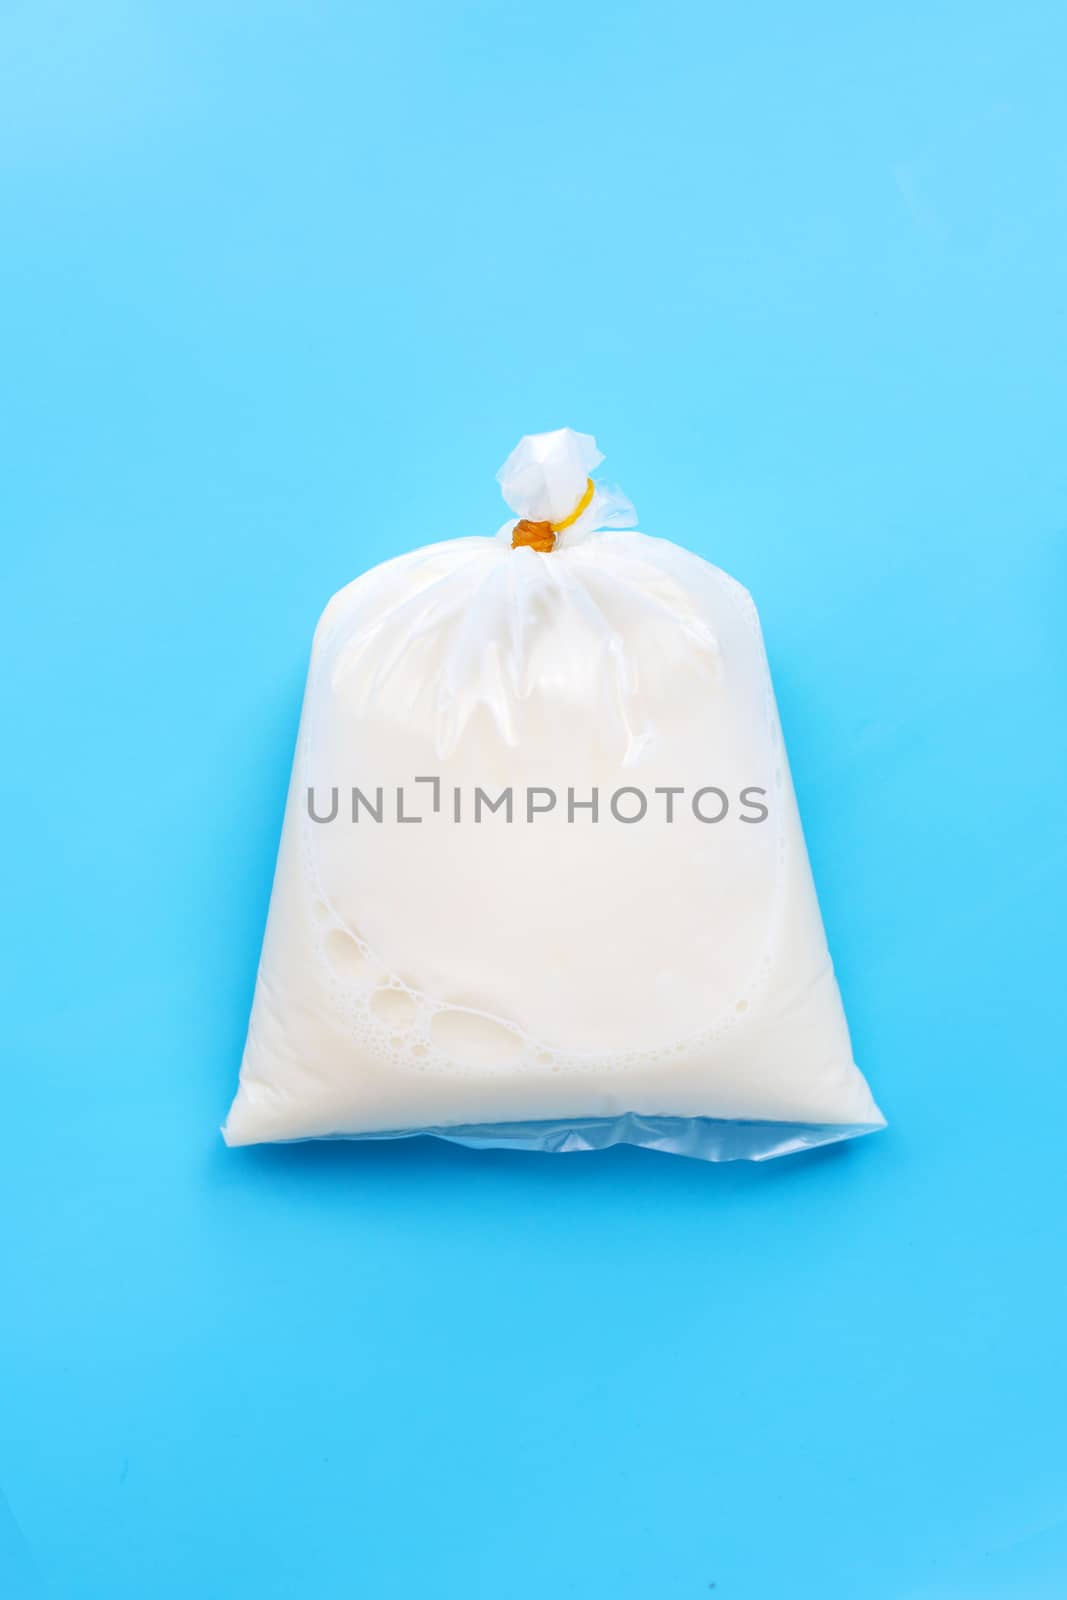 Soybean milk in plastic bag on blue background.  by Bowonpat